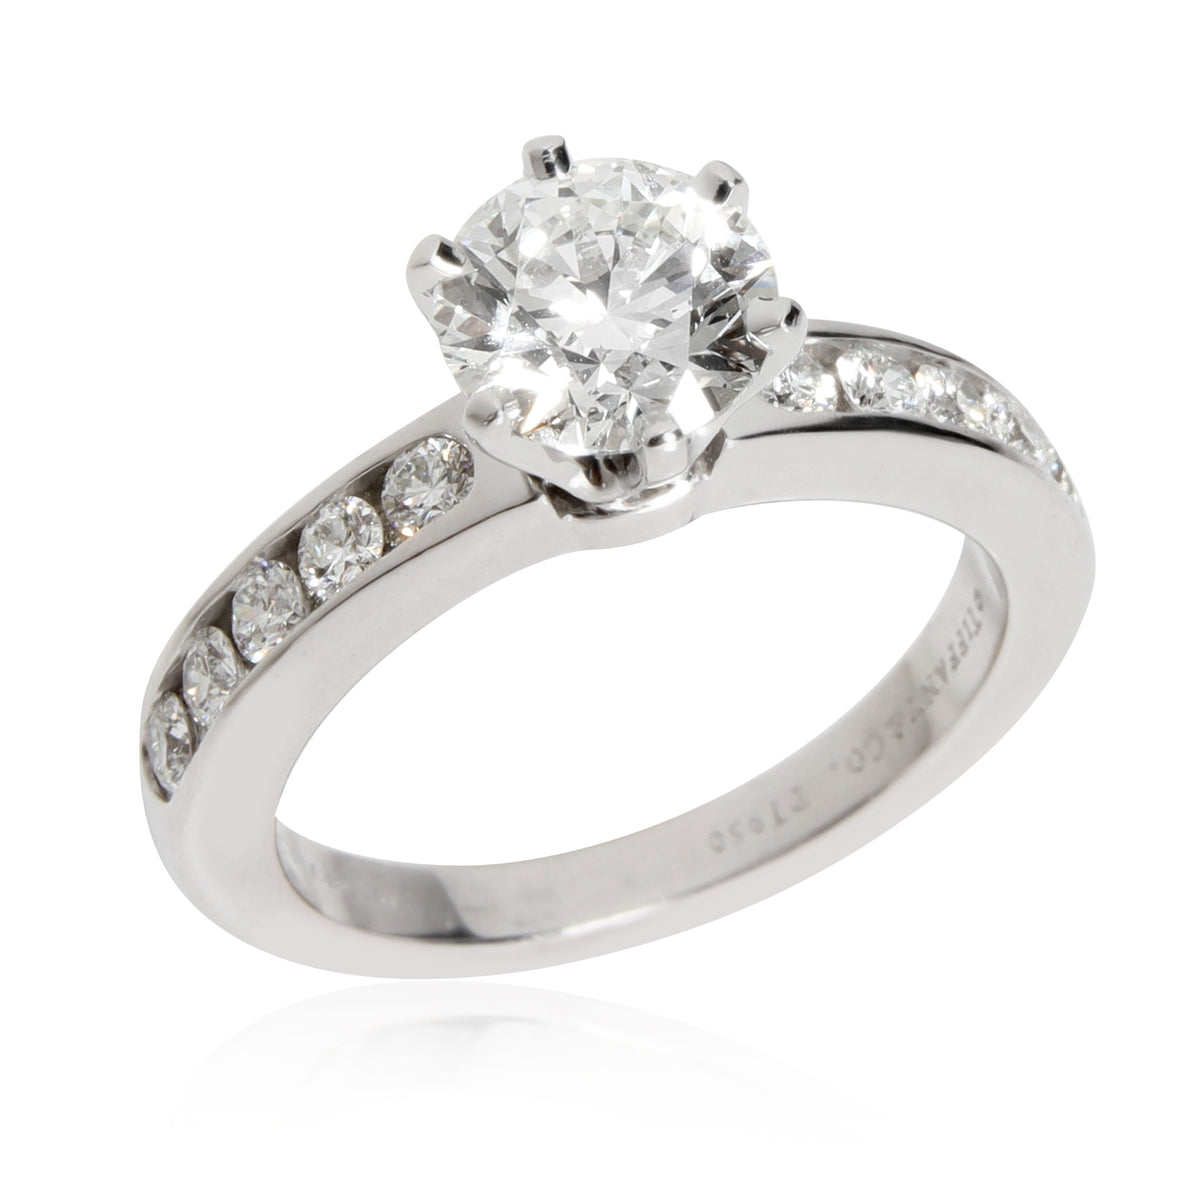 Tiffany & Co. Channel Diamond Engagement Ring in  Platinum H VS1 1.71 CTW